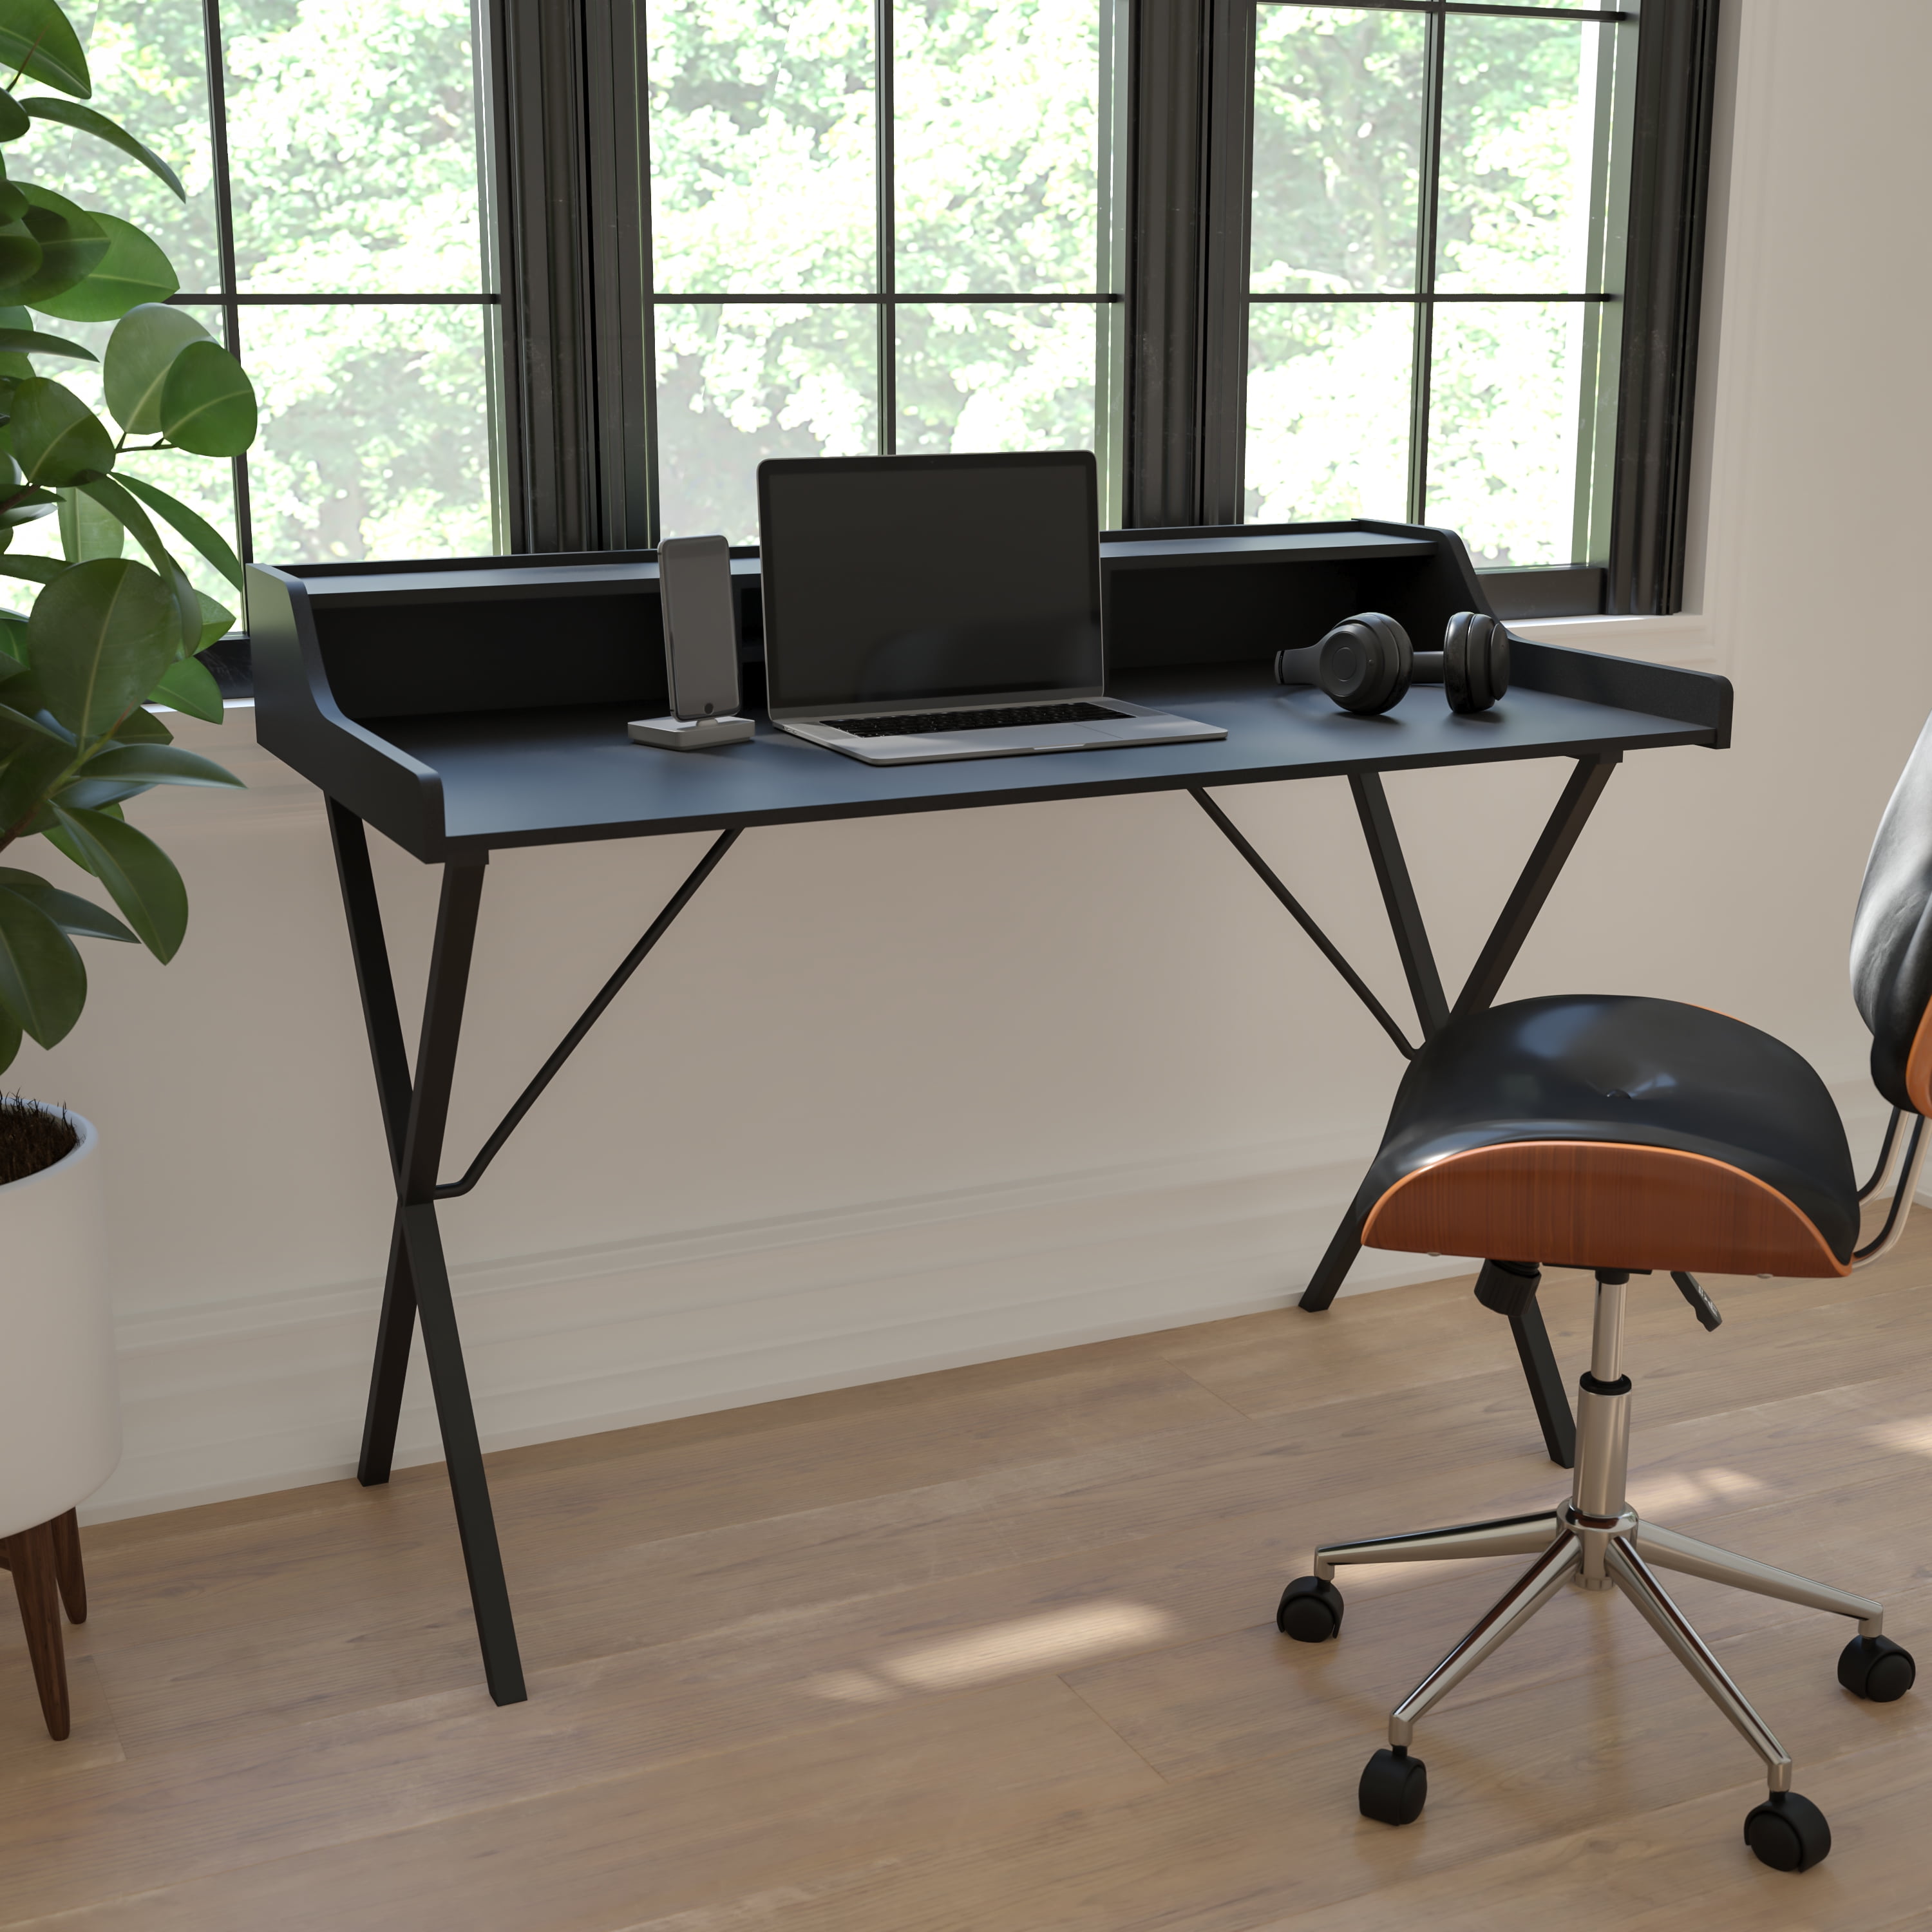 Computer Desk Study Student Laptop Table with Shelf Home Office Furniture Black 